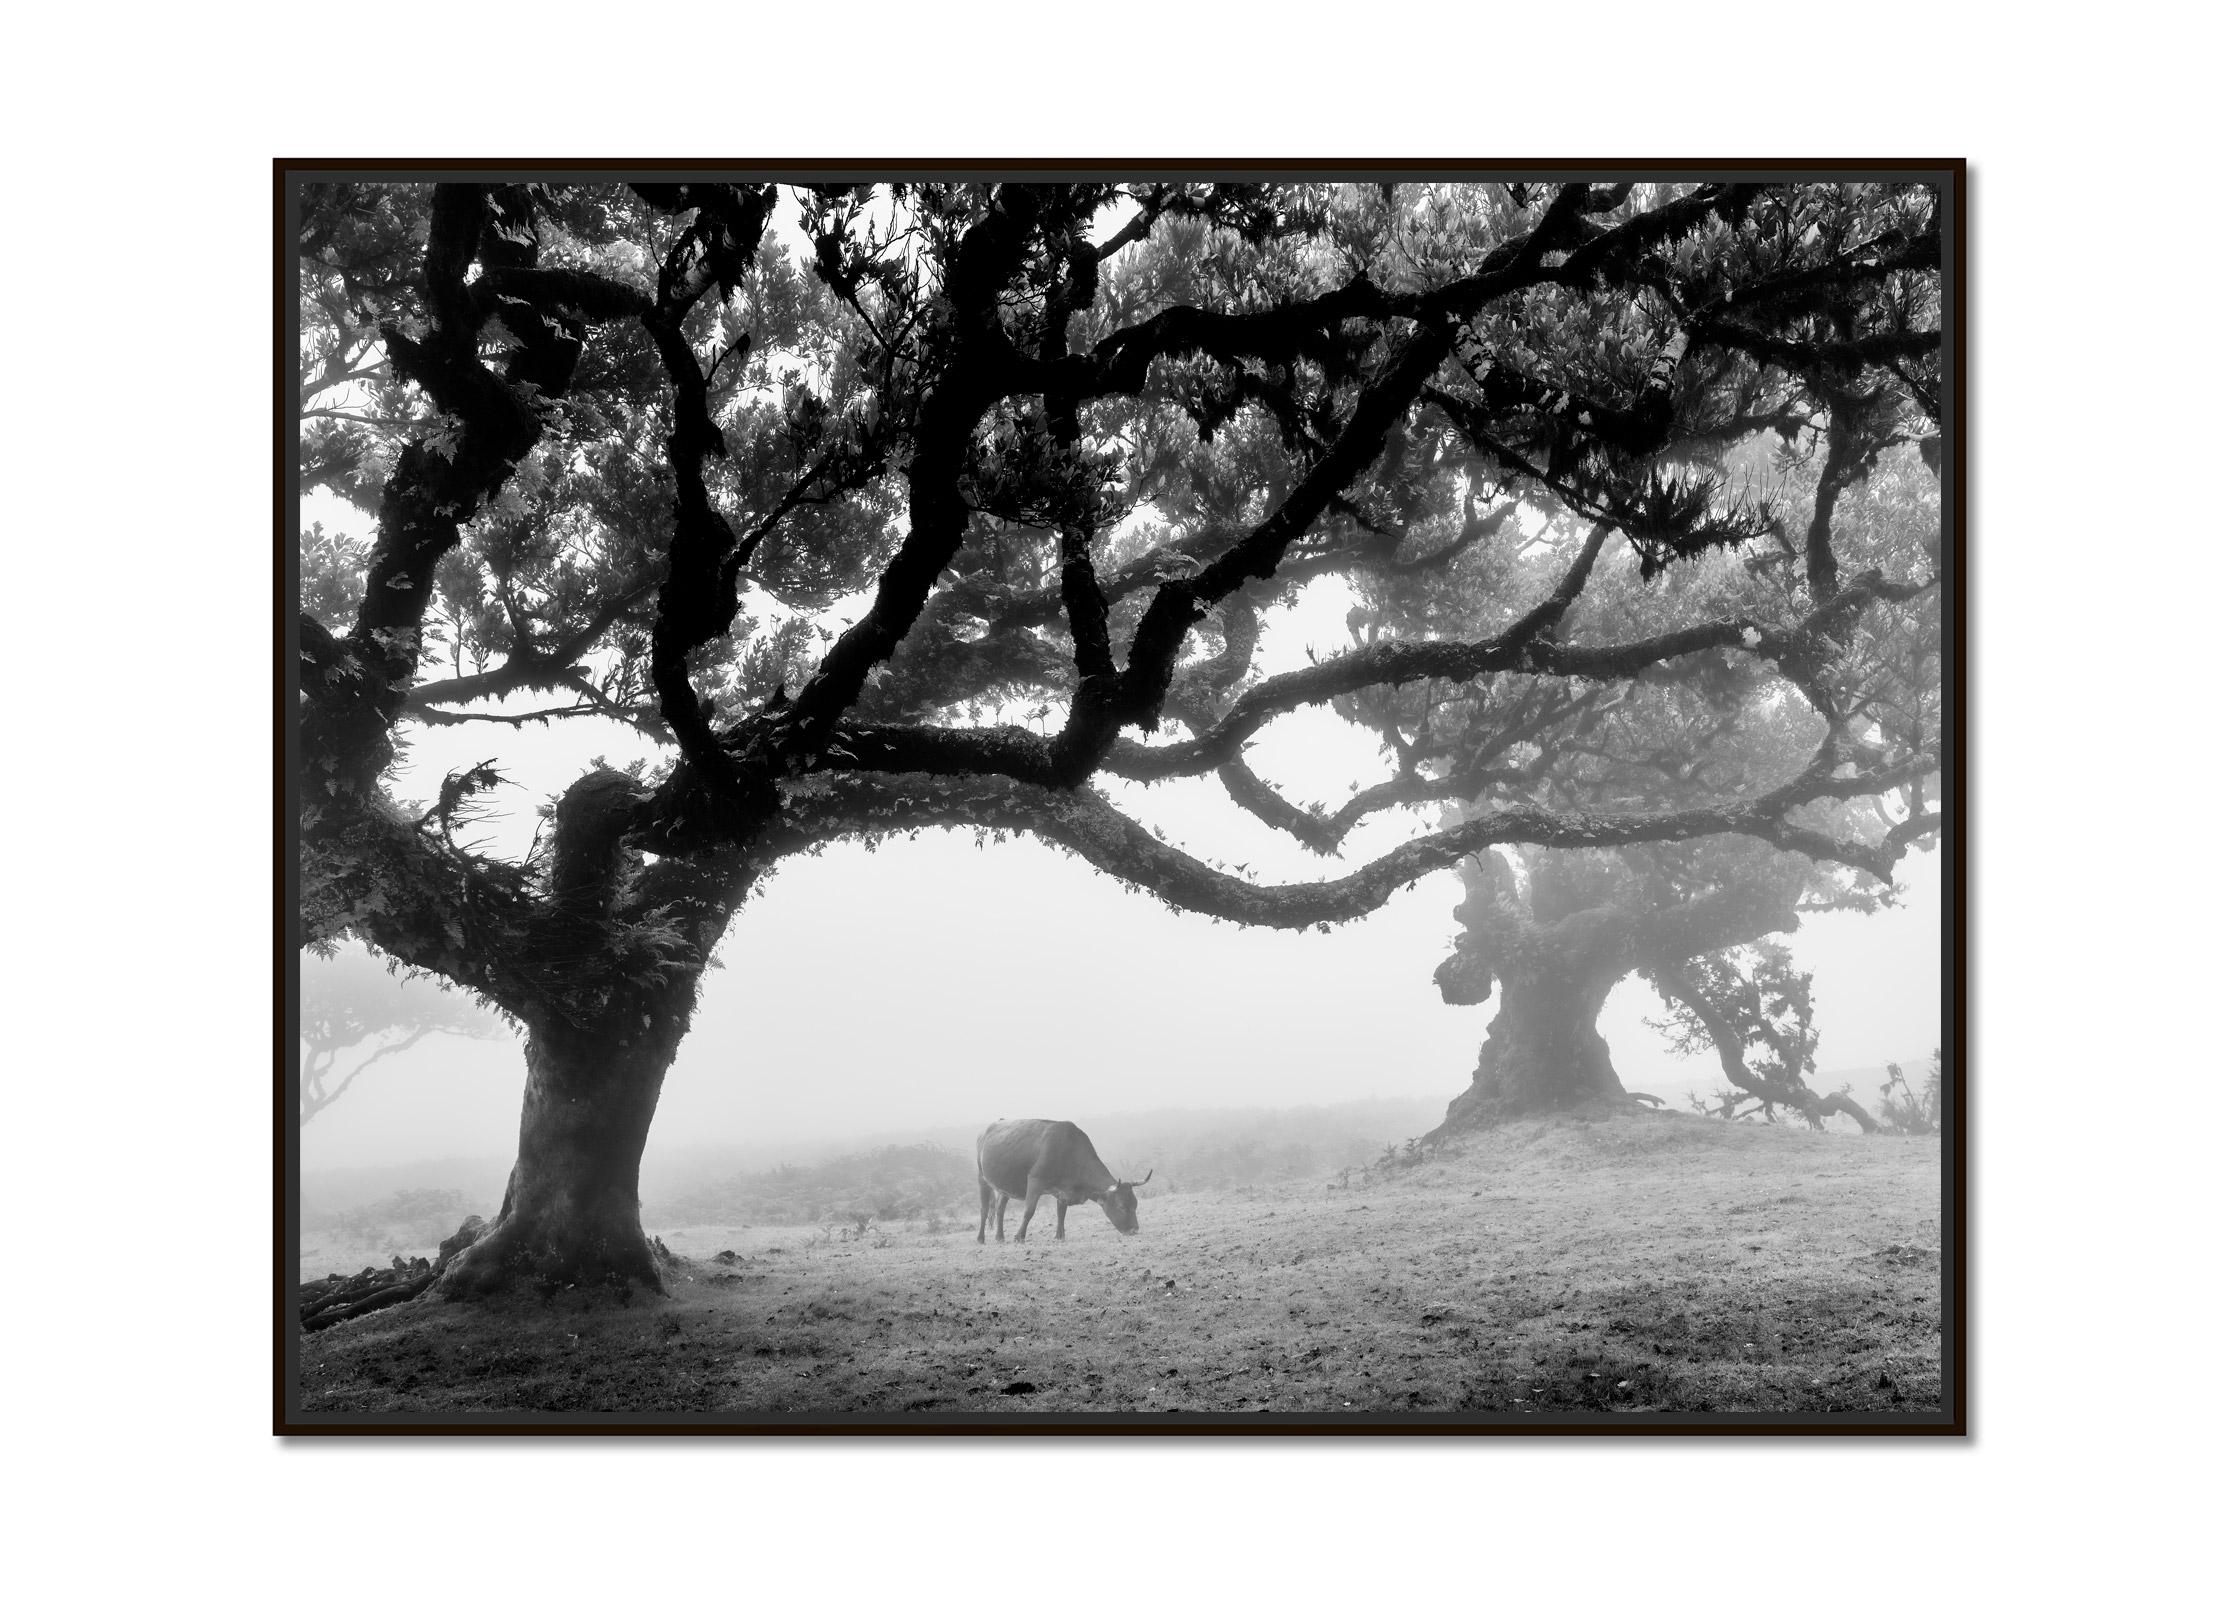 Cows on the foggy Pasture, Madeira, black and white, landscape photography - Photograph by Gerald Berghammer